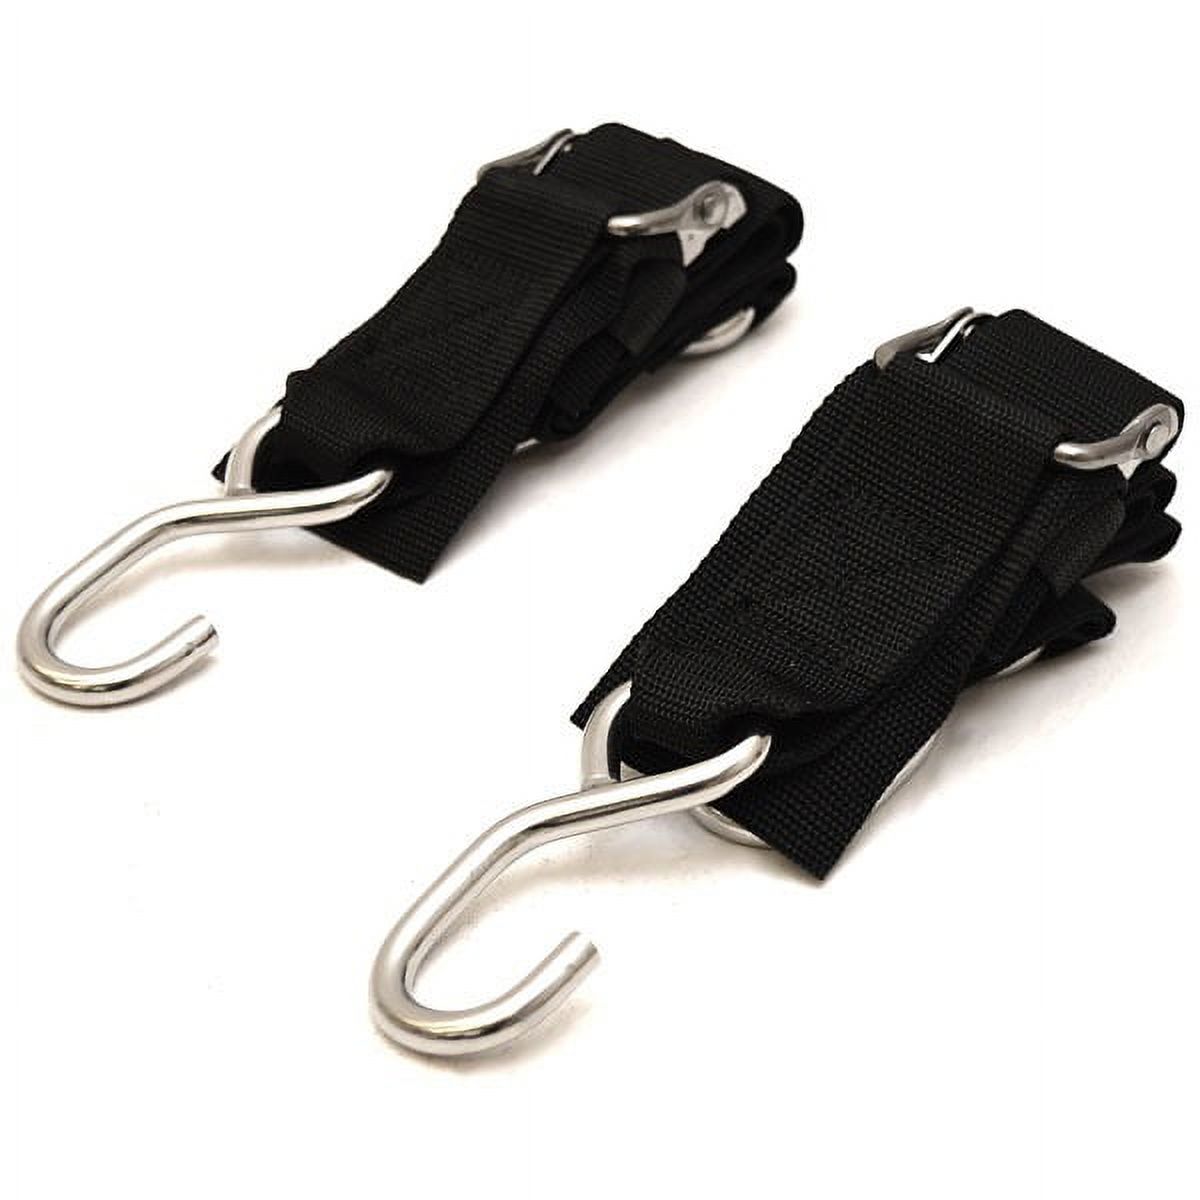 Attwood Boat Transom Tie-Down Straps 15232SS-7 | Black 4 Foot (Pack) - image 1 of 4